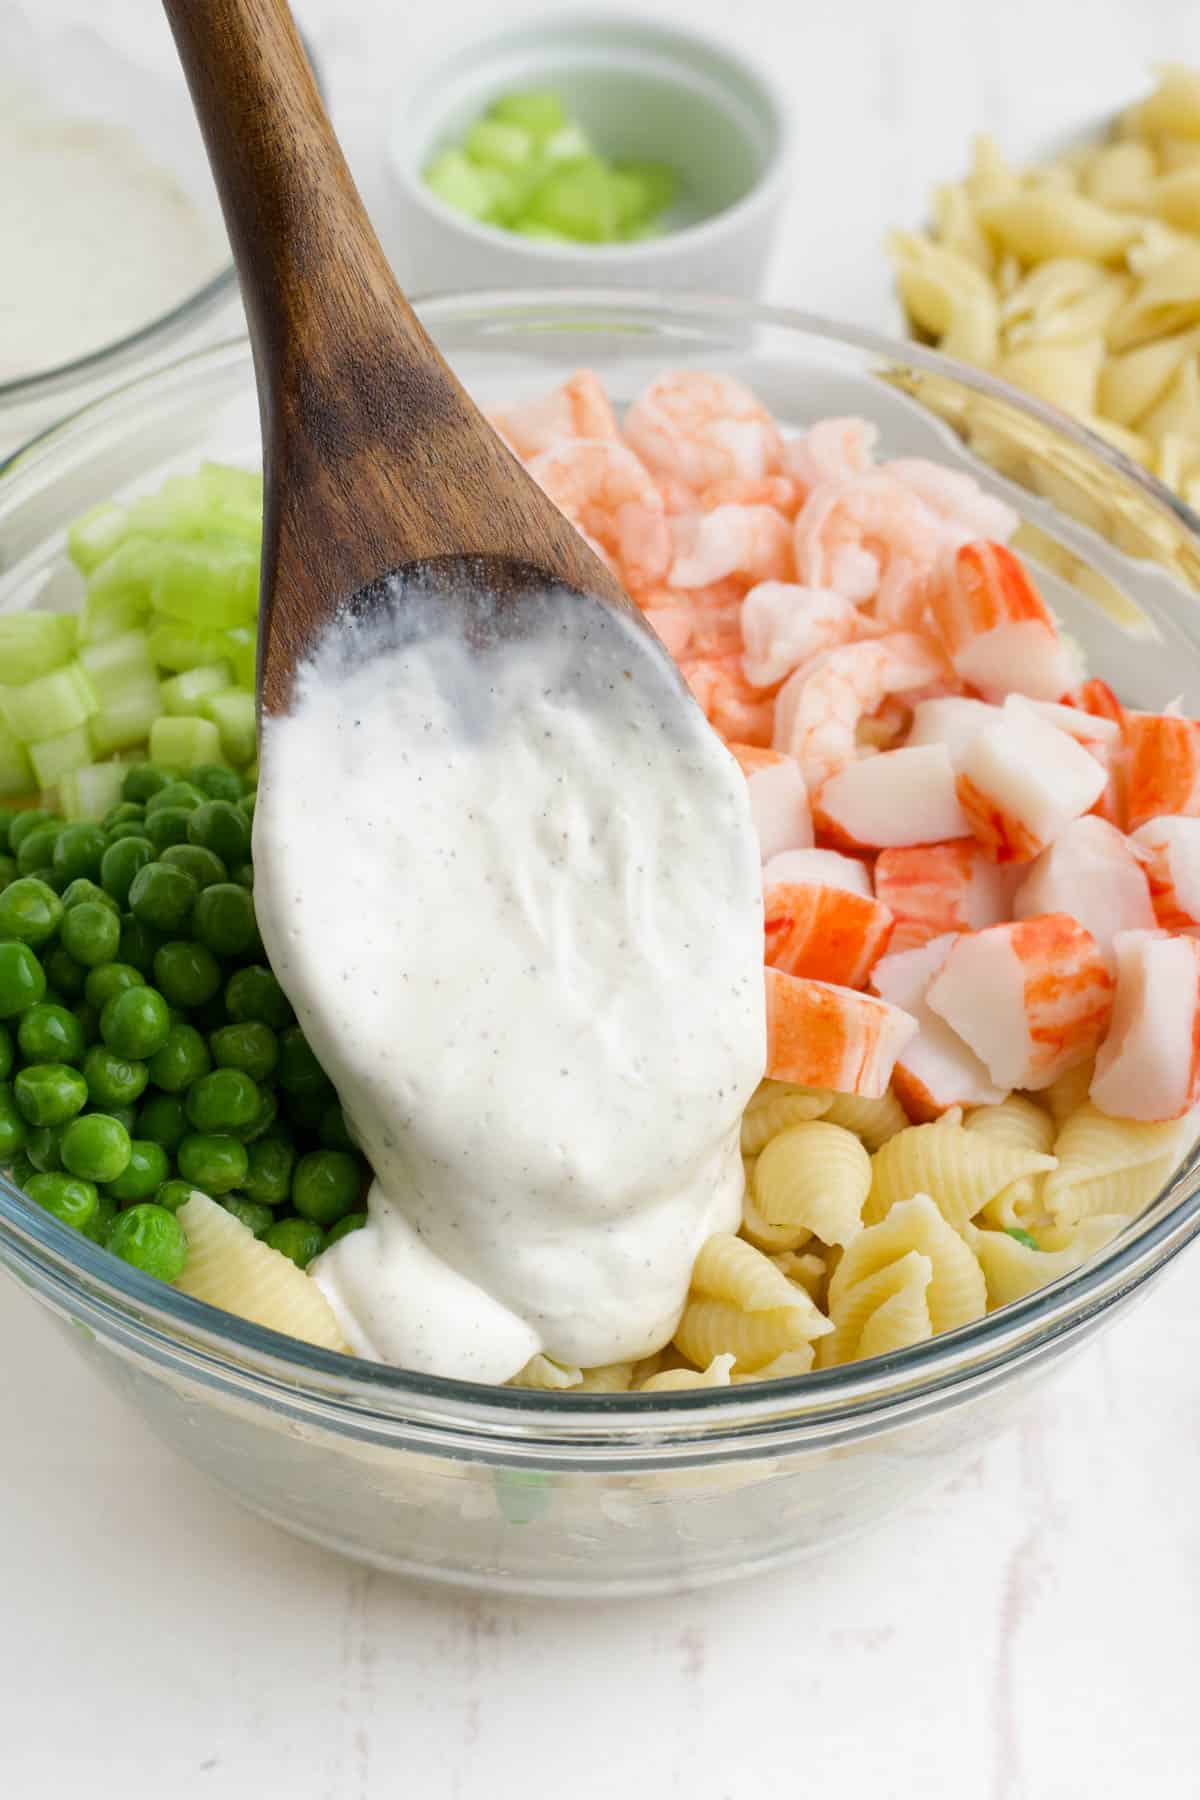 Adding a creamy dressing to a mixing bowl filled with cooked shells pasta, crab, shrimp, and peas.